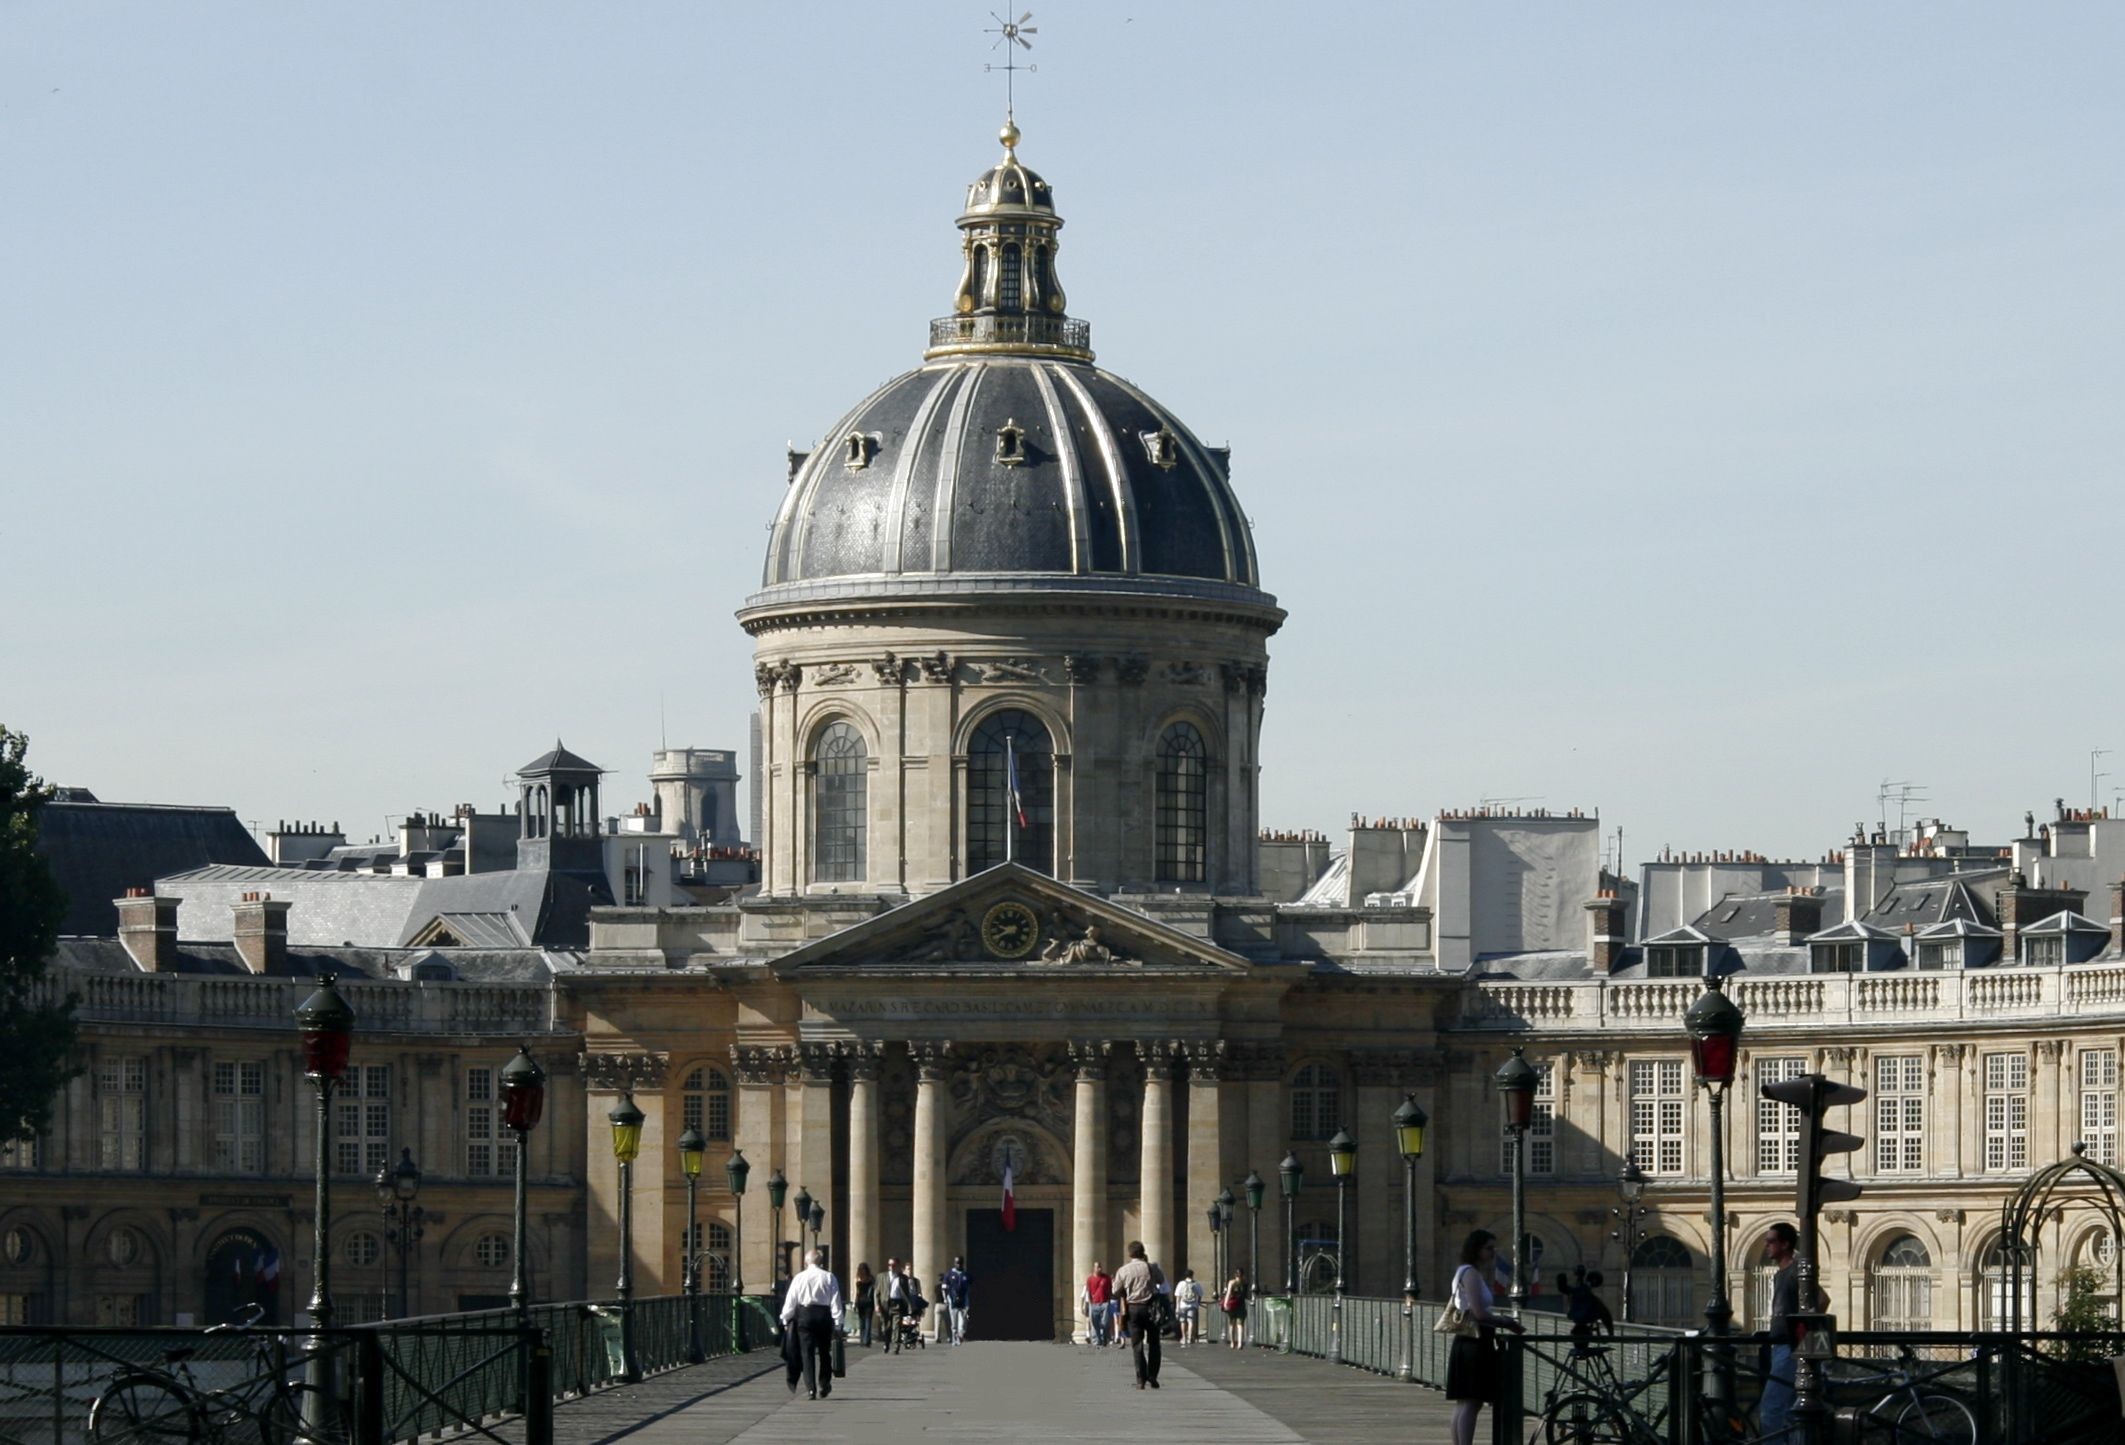 The French Academy dome